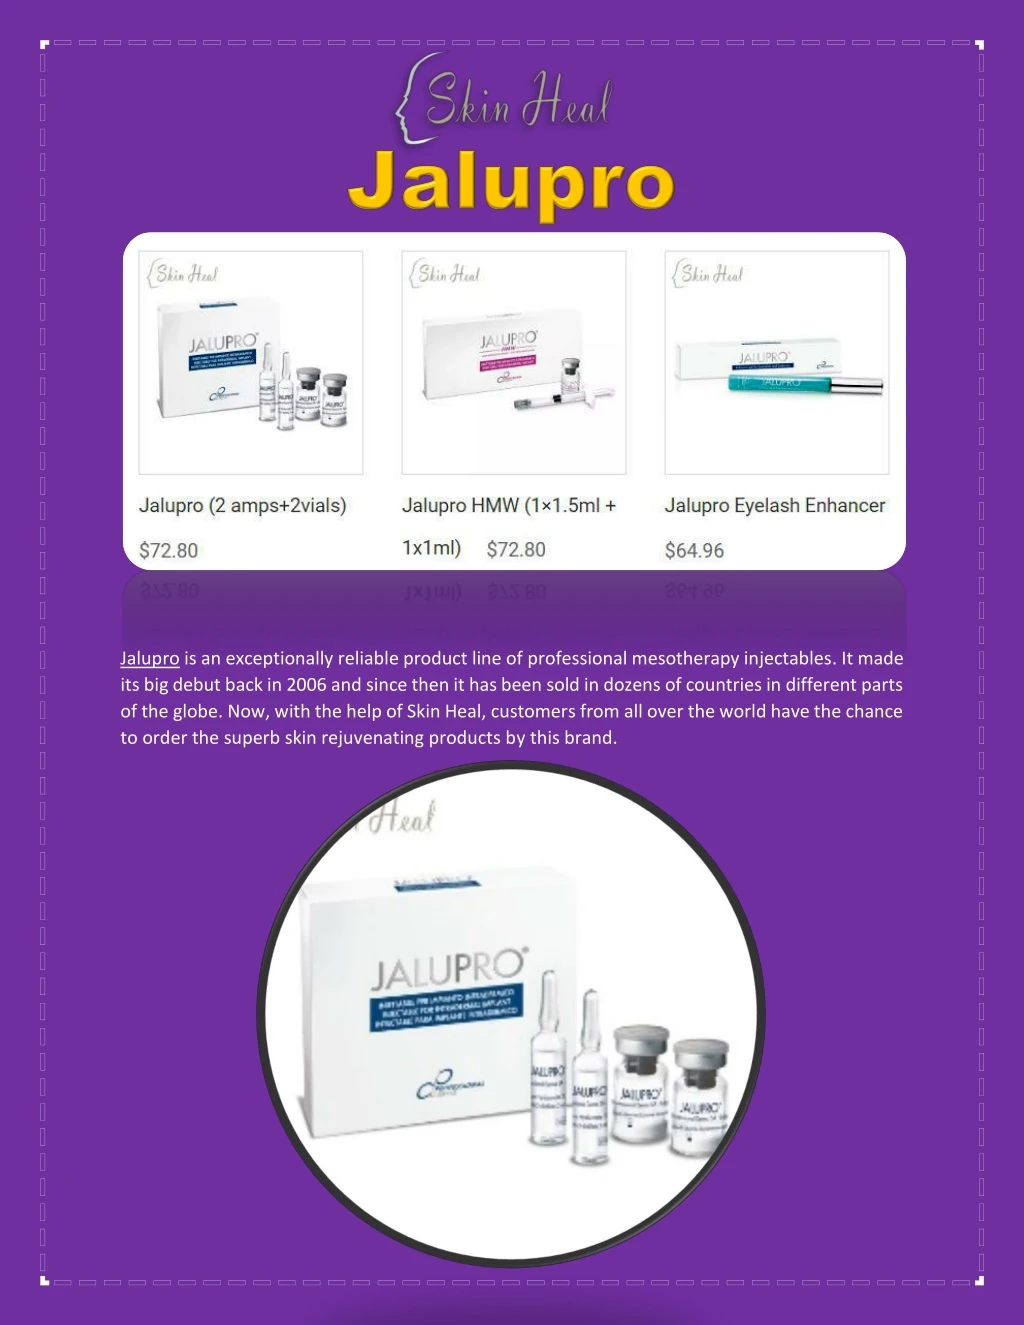 jalupro is an exceptionally reliable product line